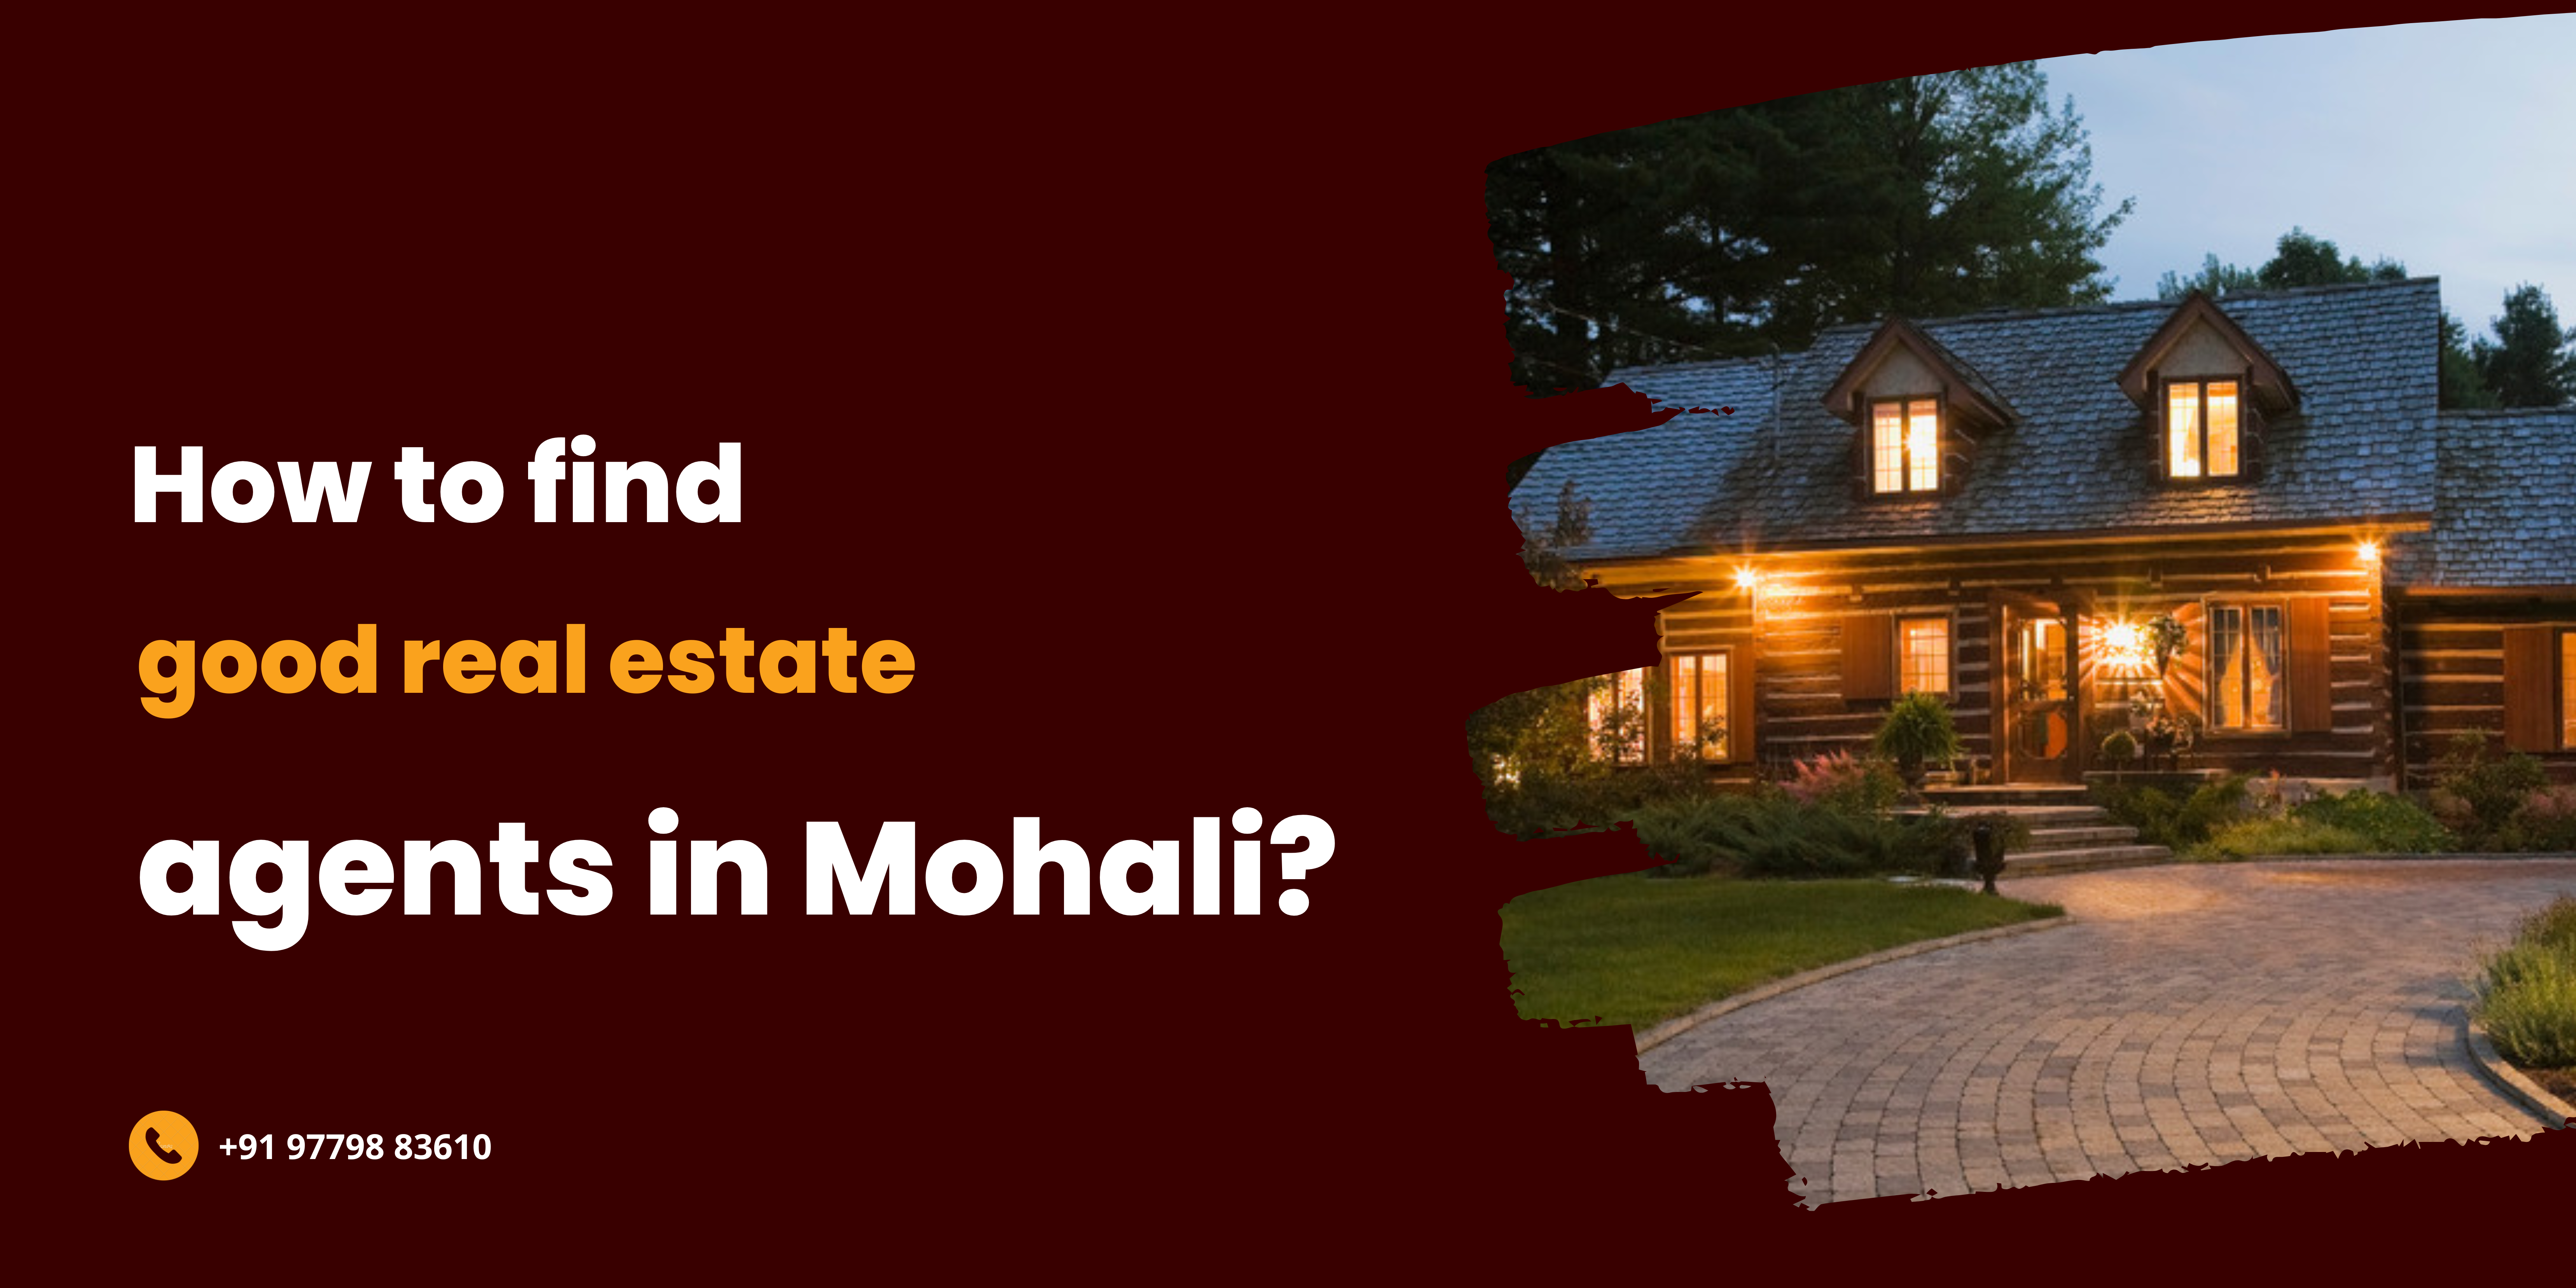 How to find good real estate agents in Mohali?